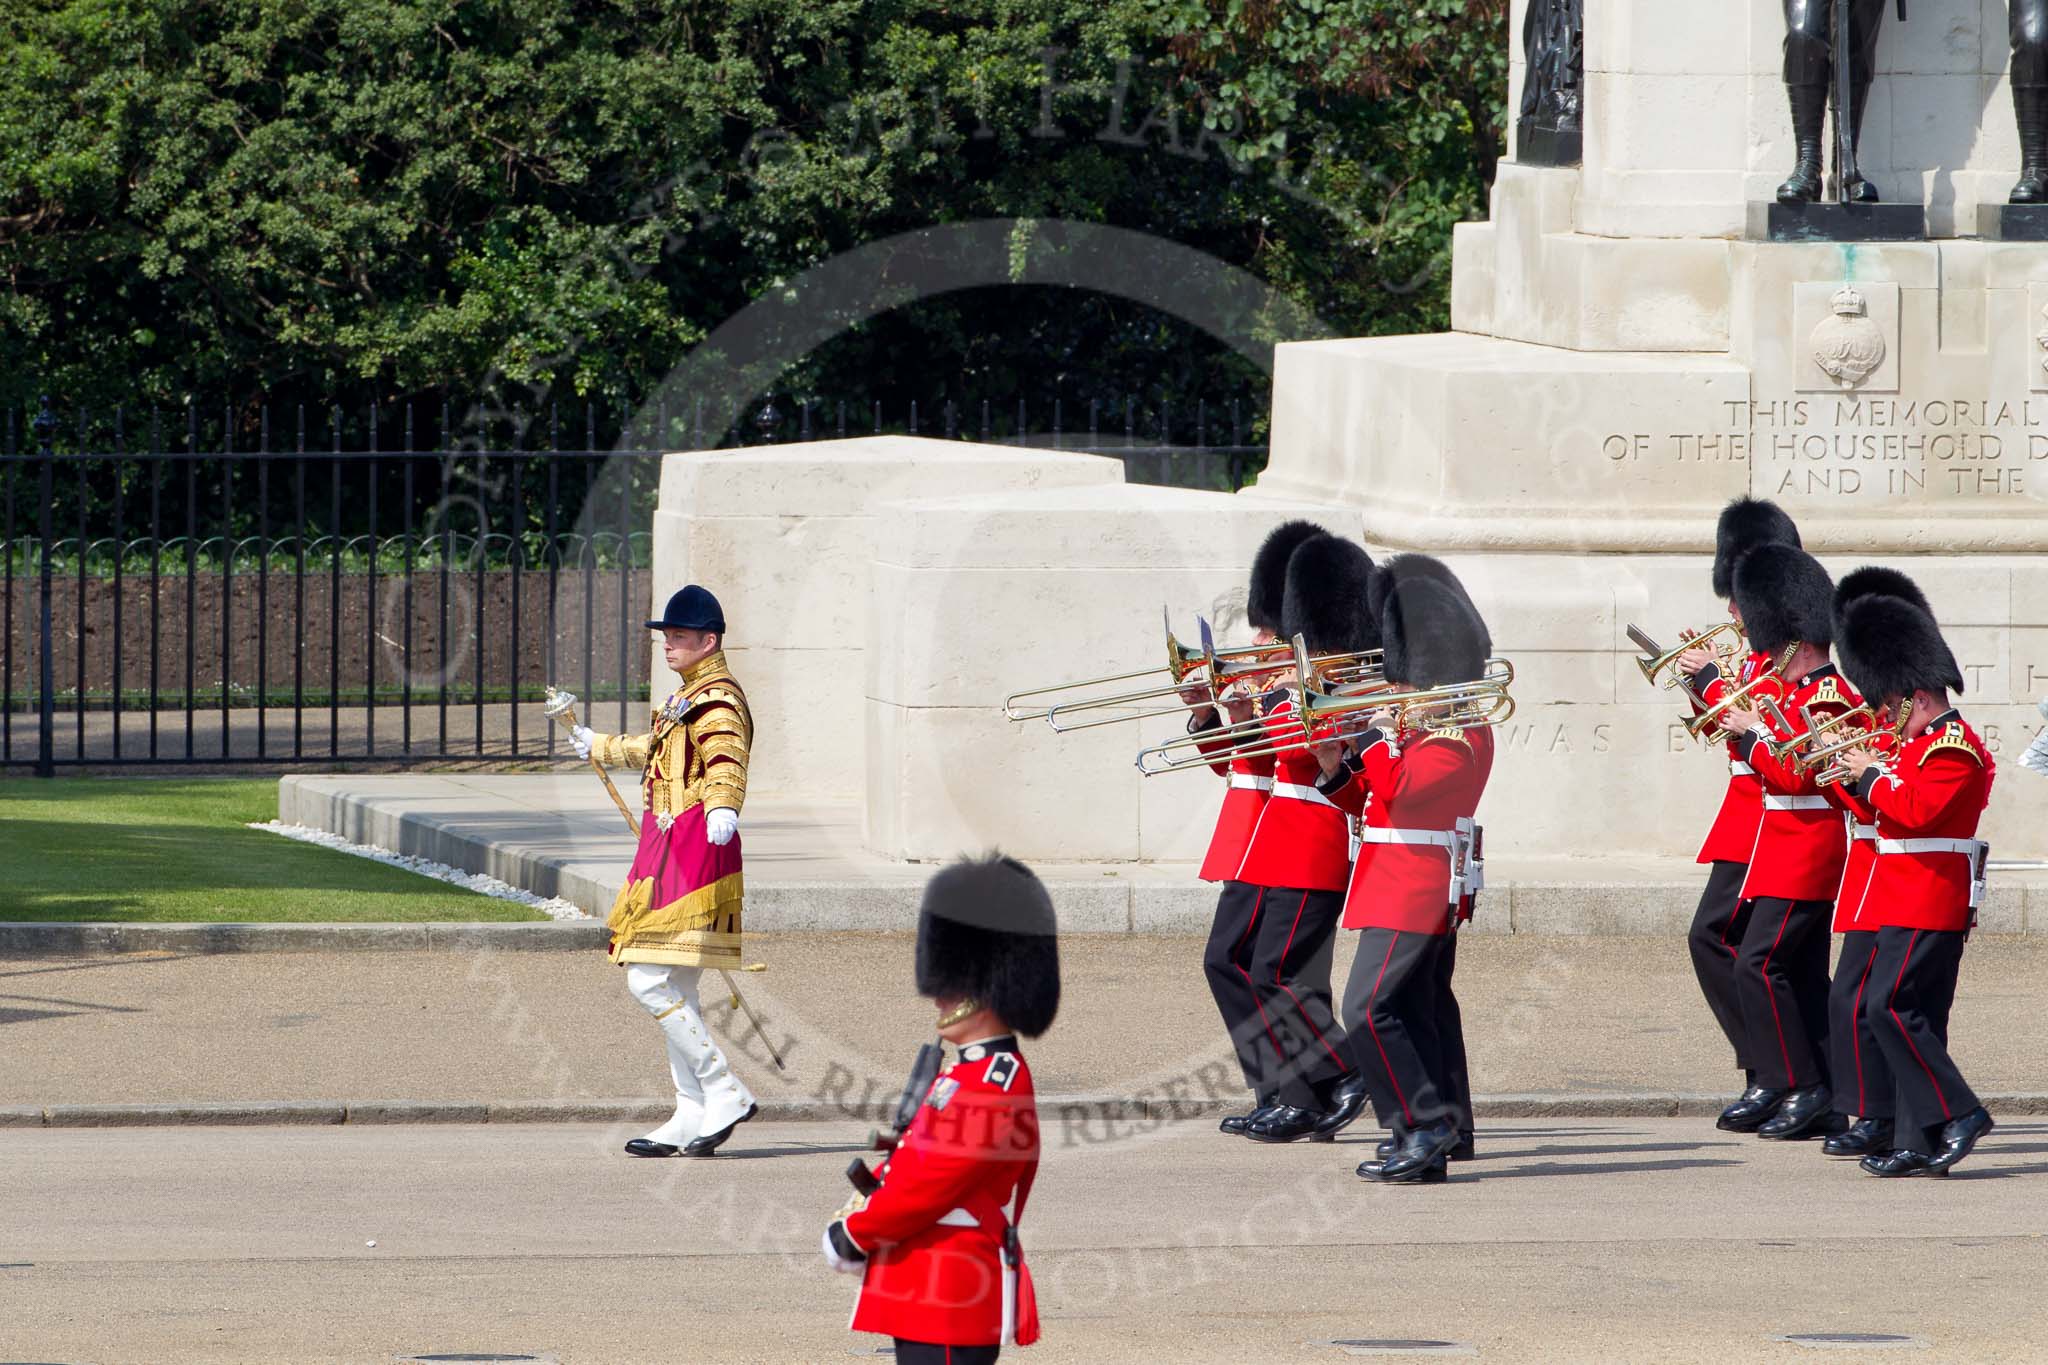 The Colonel's Review 2011: Drum Major Scott Fitzgerald, Coldstream Guards, leading the Band of the Coldstream Guards onto the parade ground, passing the Guards Memorial on the St. James's Park side of the parade ground..
Horse Guards Parade, Westminster,
London SW1,

United Kingdom,
on 04 June 2011 at 10:25, image #22